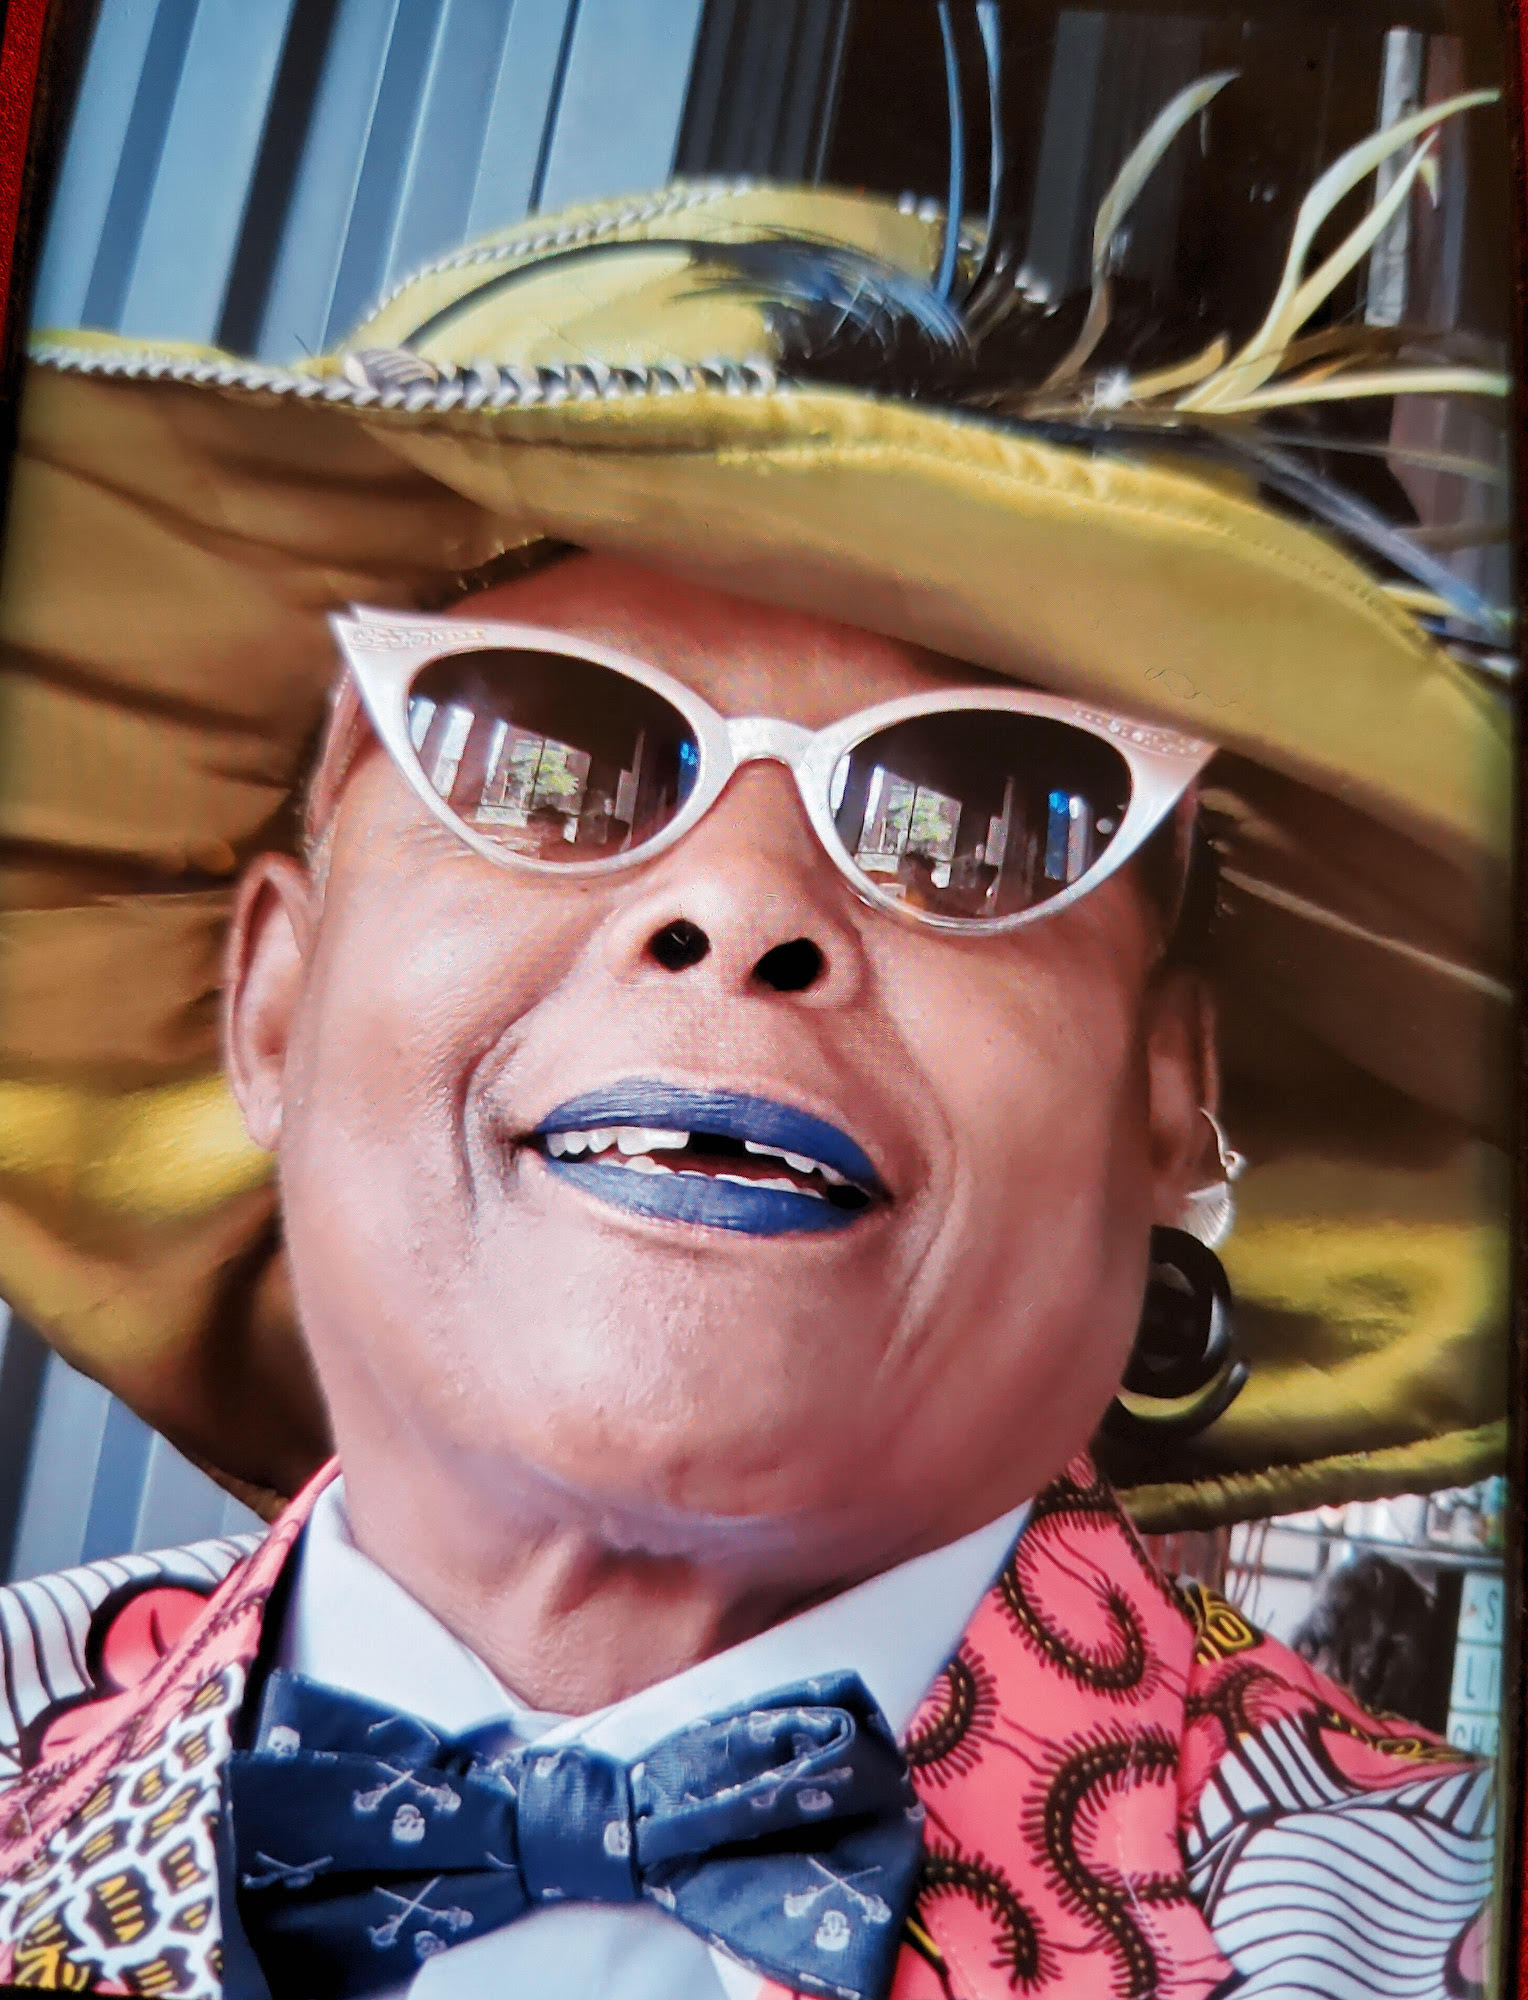 Alexis appears in a portrait-oriented color photograph, cropped tightly around the head from the neck up so that almost no background is visible. She is wearing a brightly colored, multi-patterned vest or jacket, a white button down, and a dark blue bowtie with small skulls and crossed swords on it. She is wearing a fantastic yellow or chartreuse hat with multicolored feathers, silver metal cat eye sunglasses, and a blue matte lipstick that almost matches the blue of her bowtie. She is looking up and to the left and smiling.